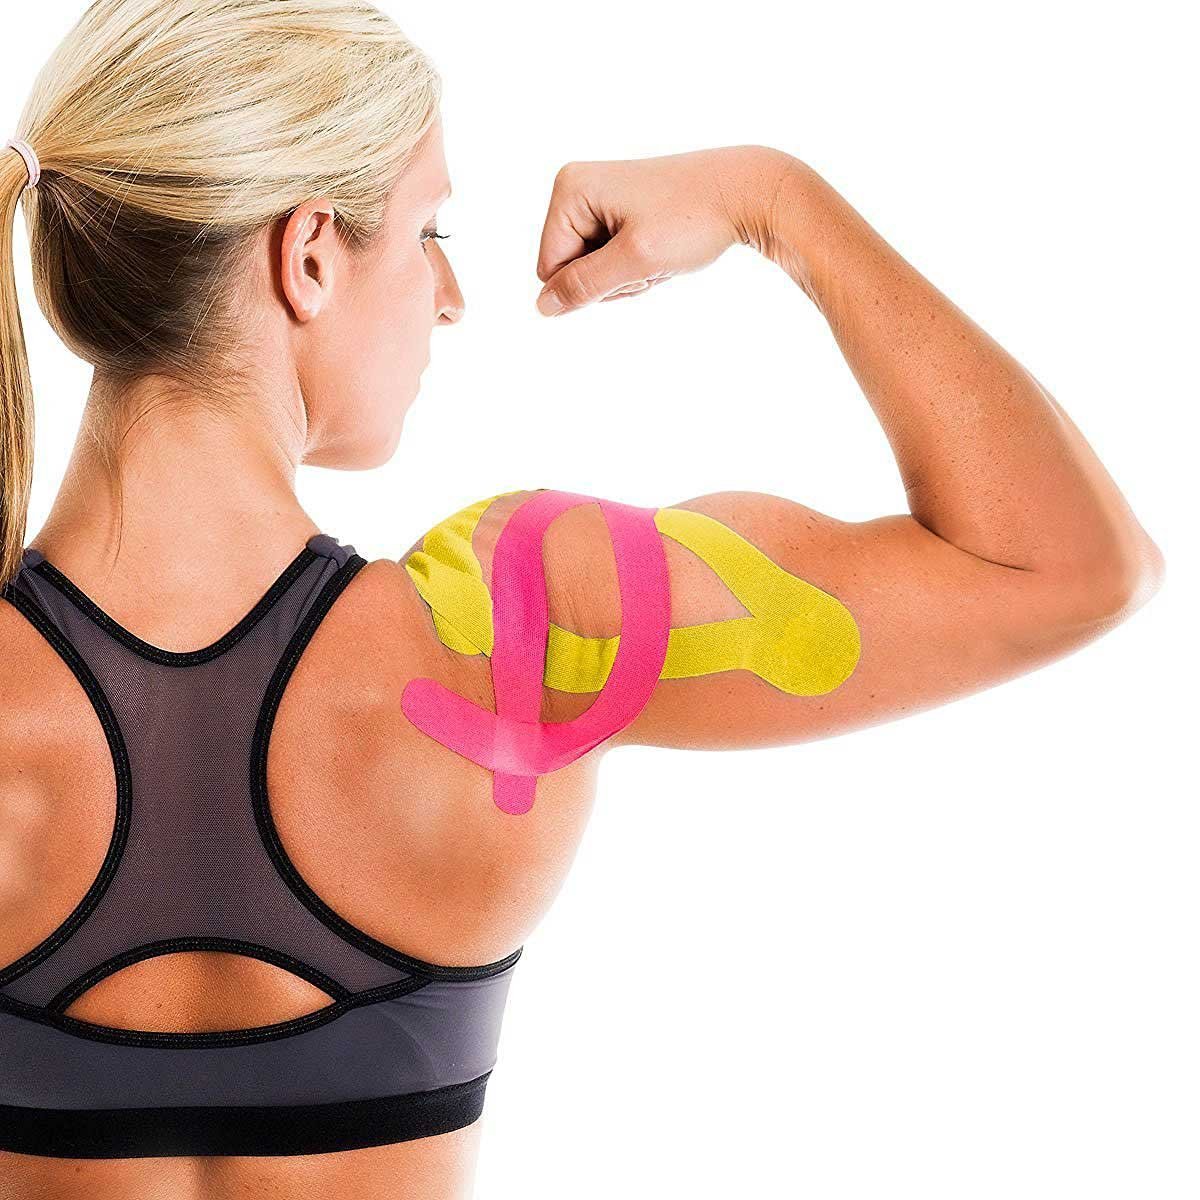 Some Quick Facts About The Kinesiology Tape